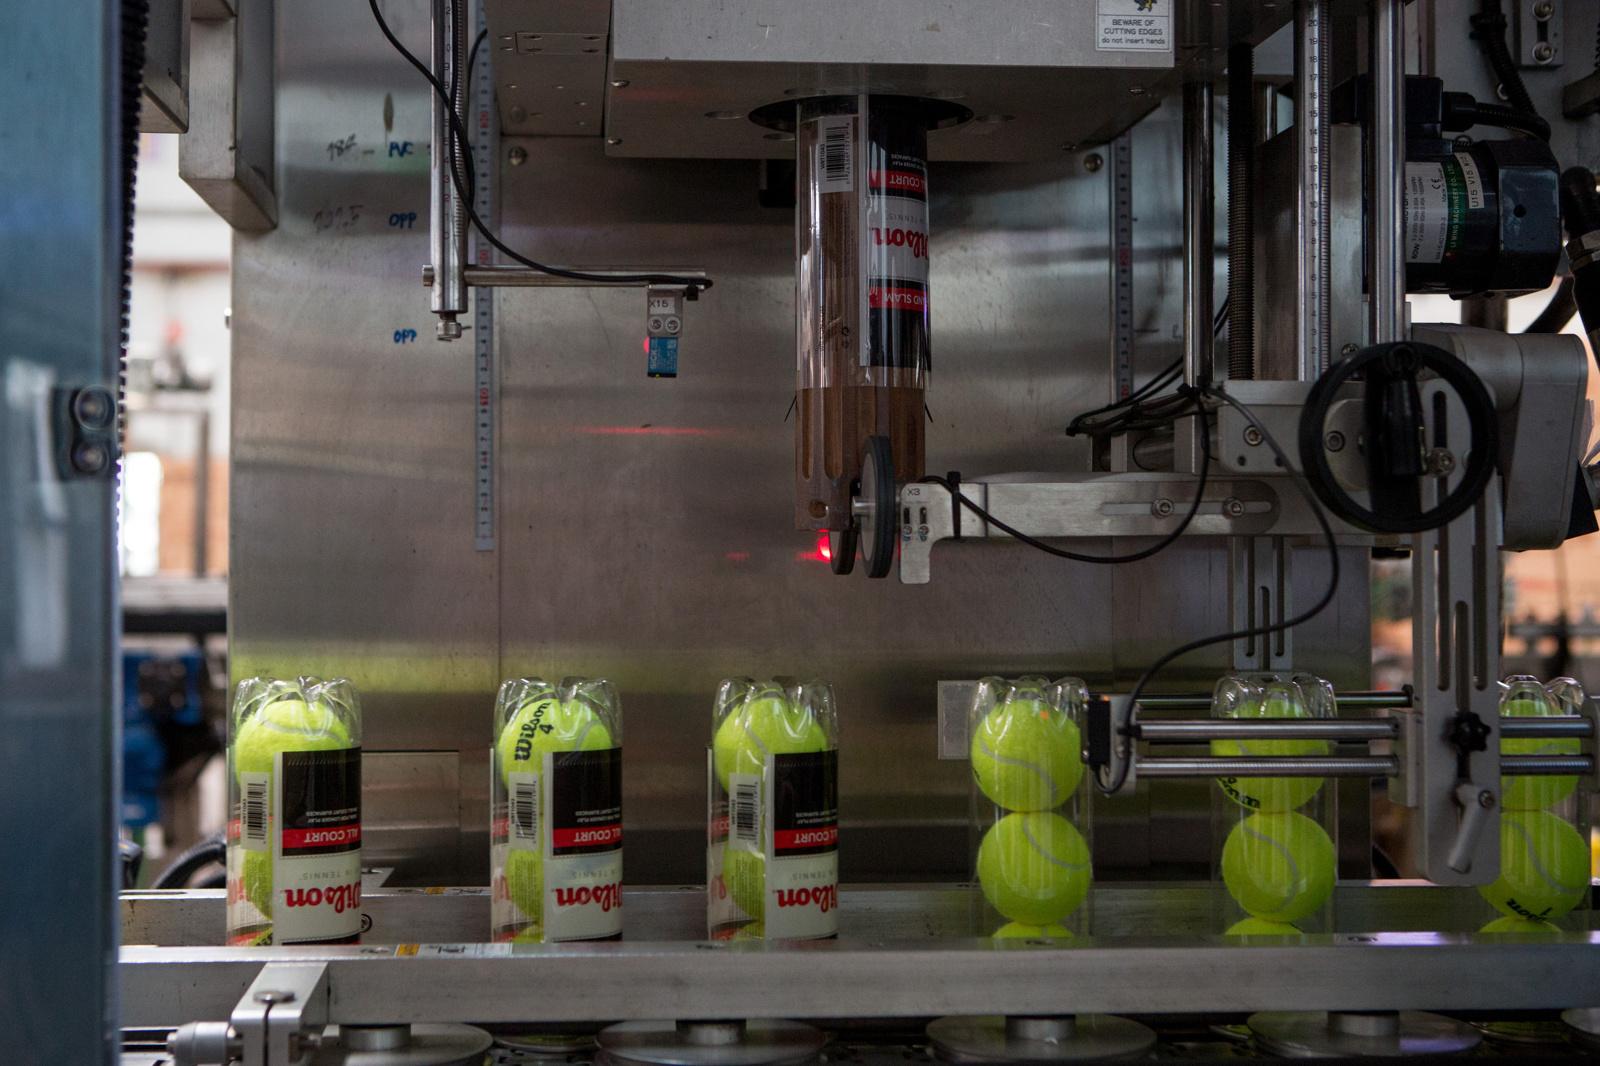 Wilson Tennis Ball Factory - For The New York Times - Nakhon Pathom, Thailand Ð August 18, 2016 : Labels are...